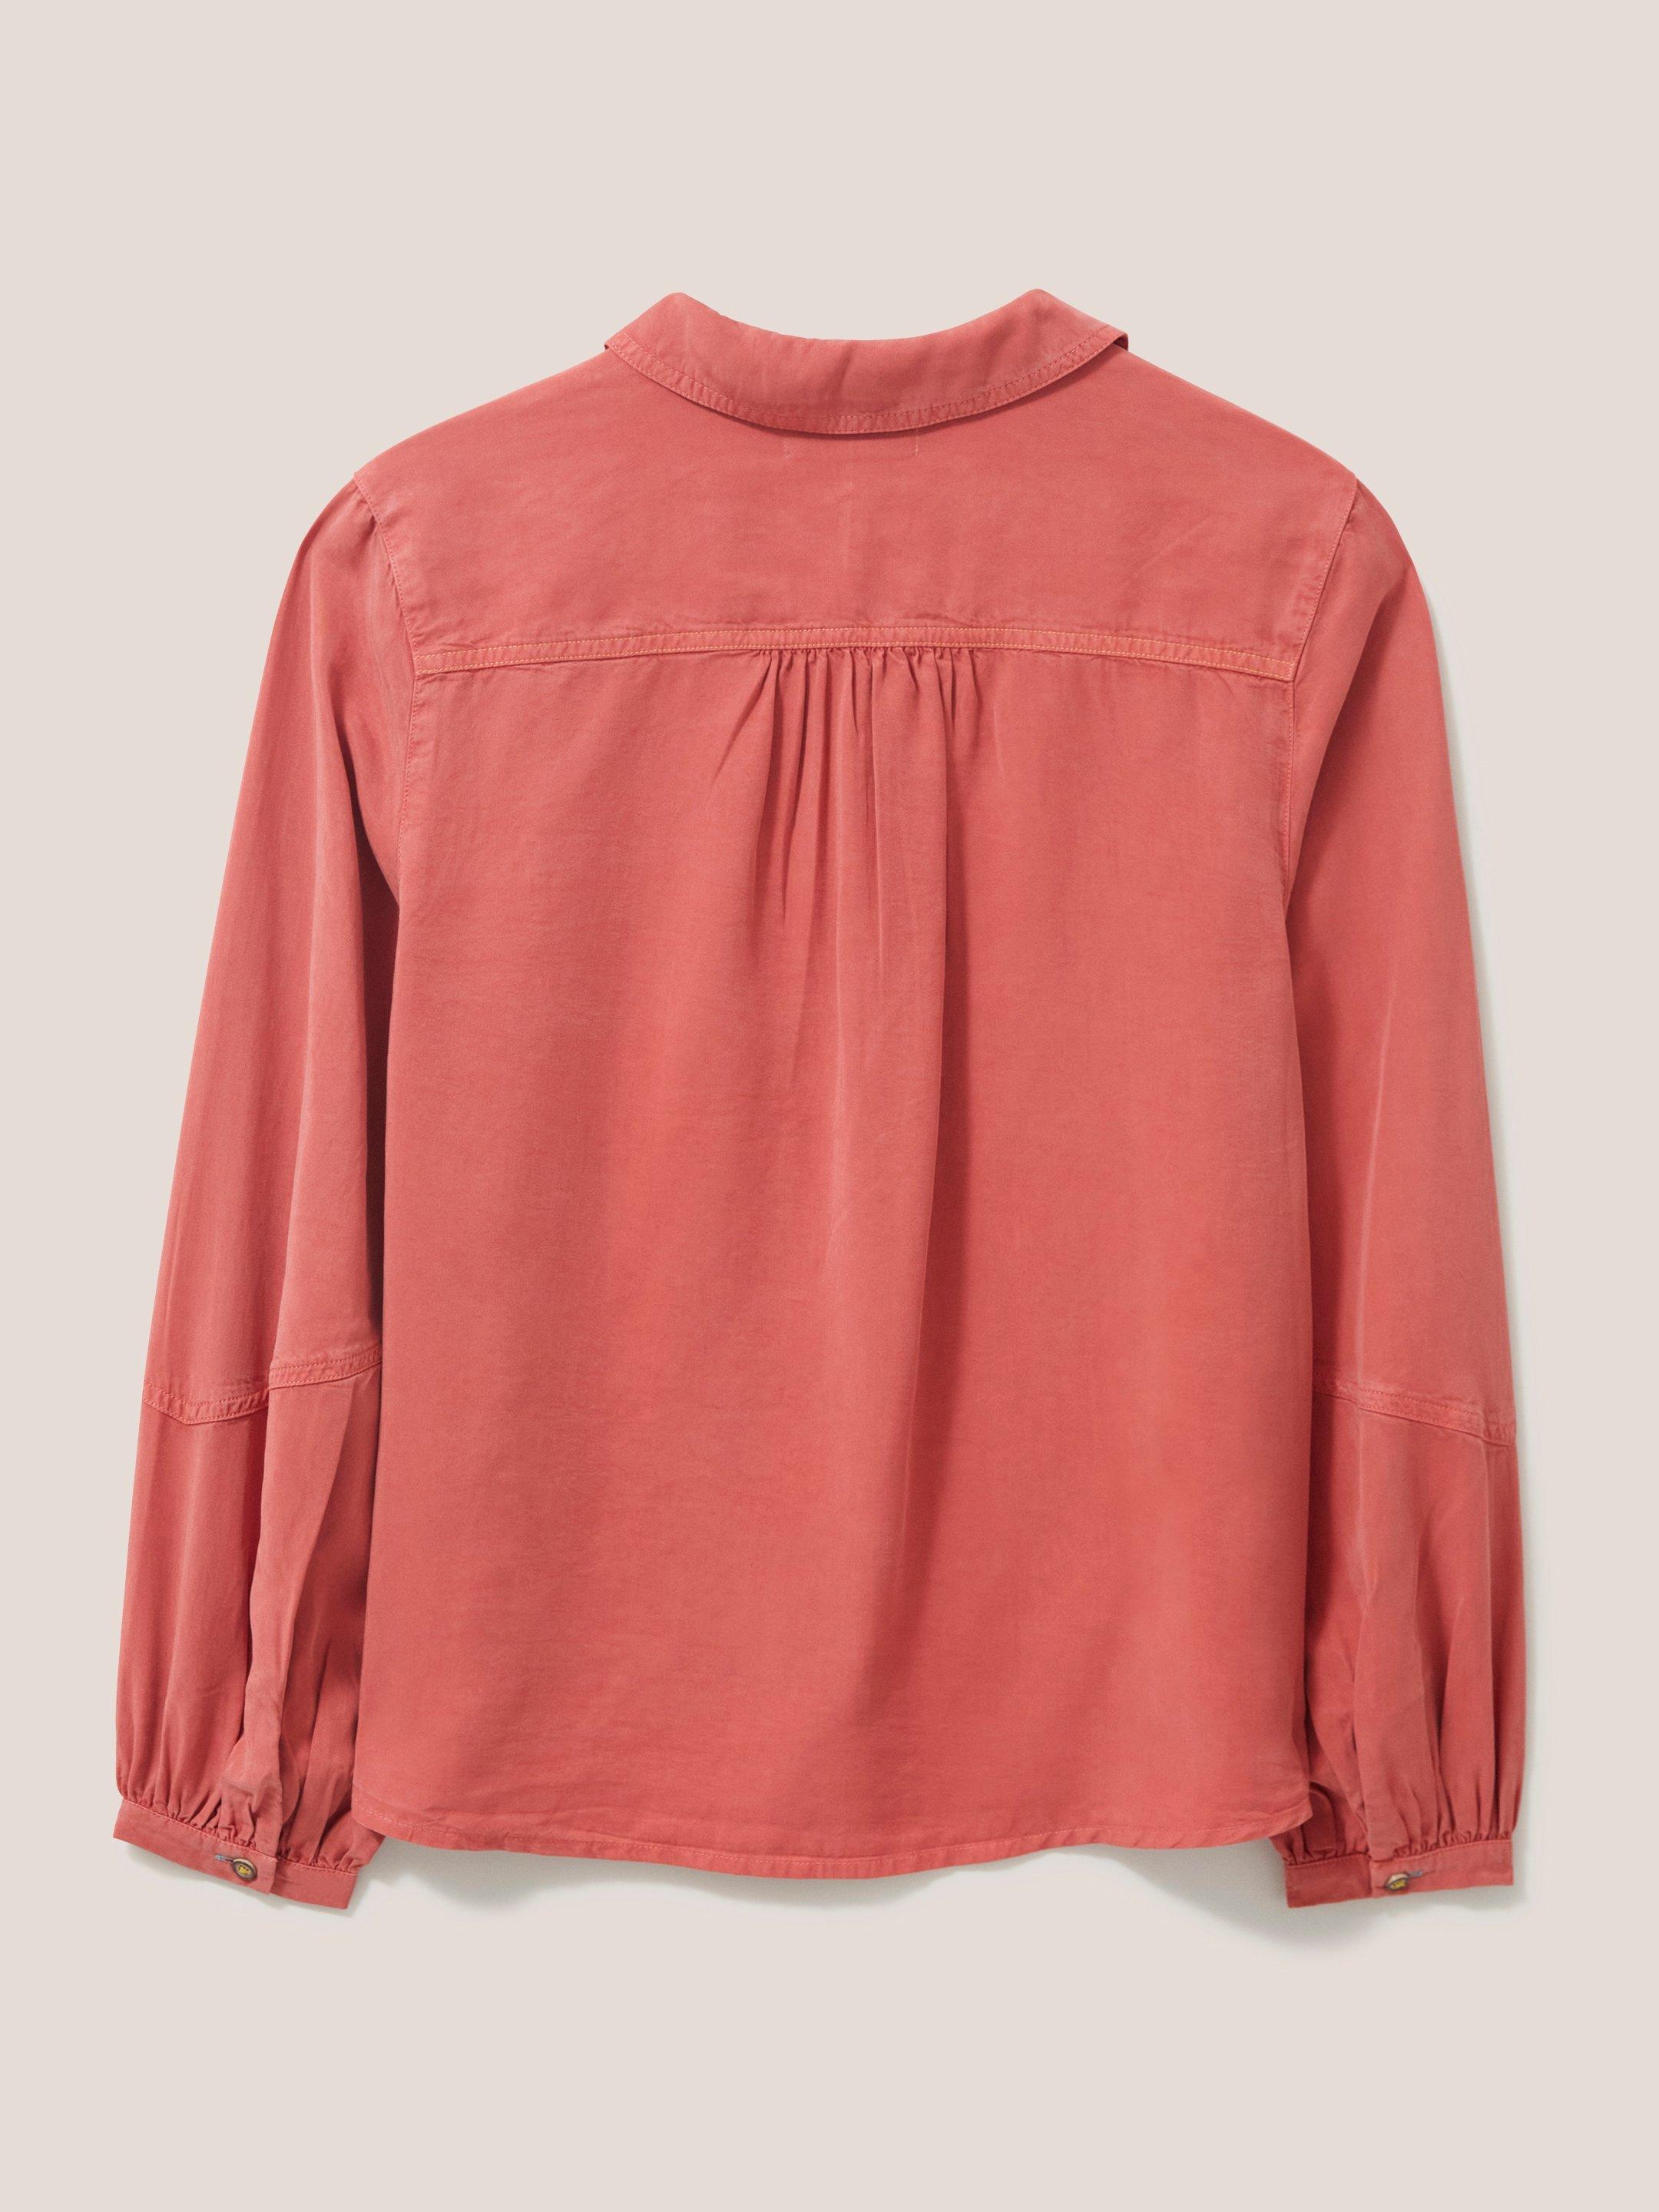 Lucie Shirt in DUS PINK - FLAT BACK